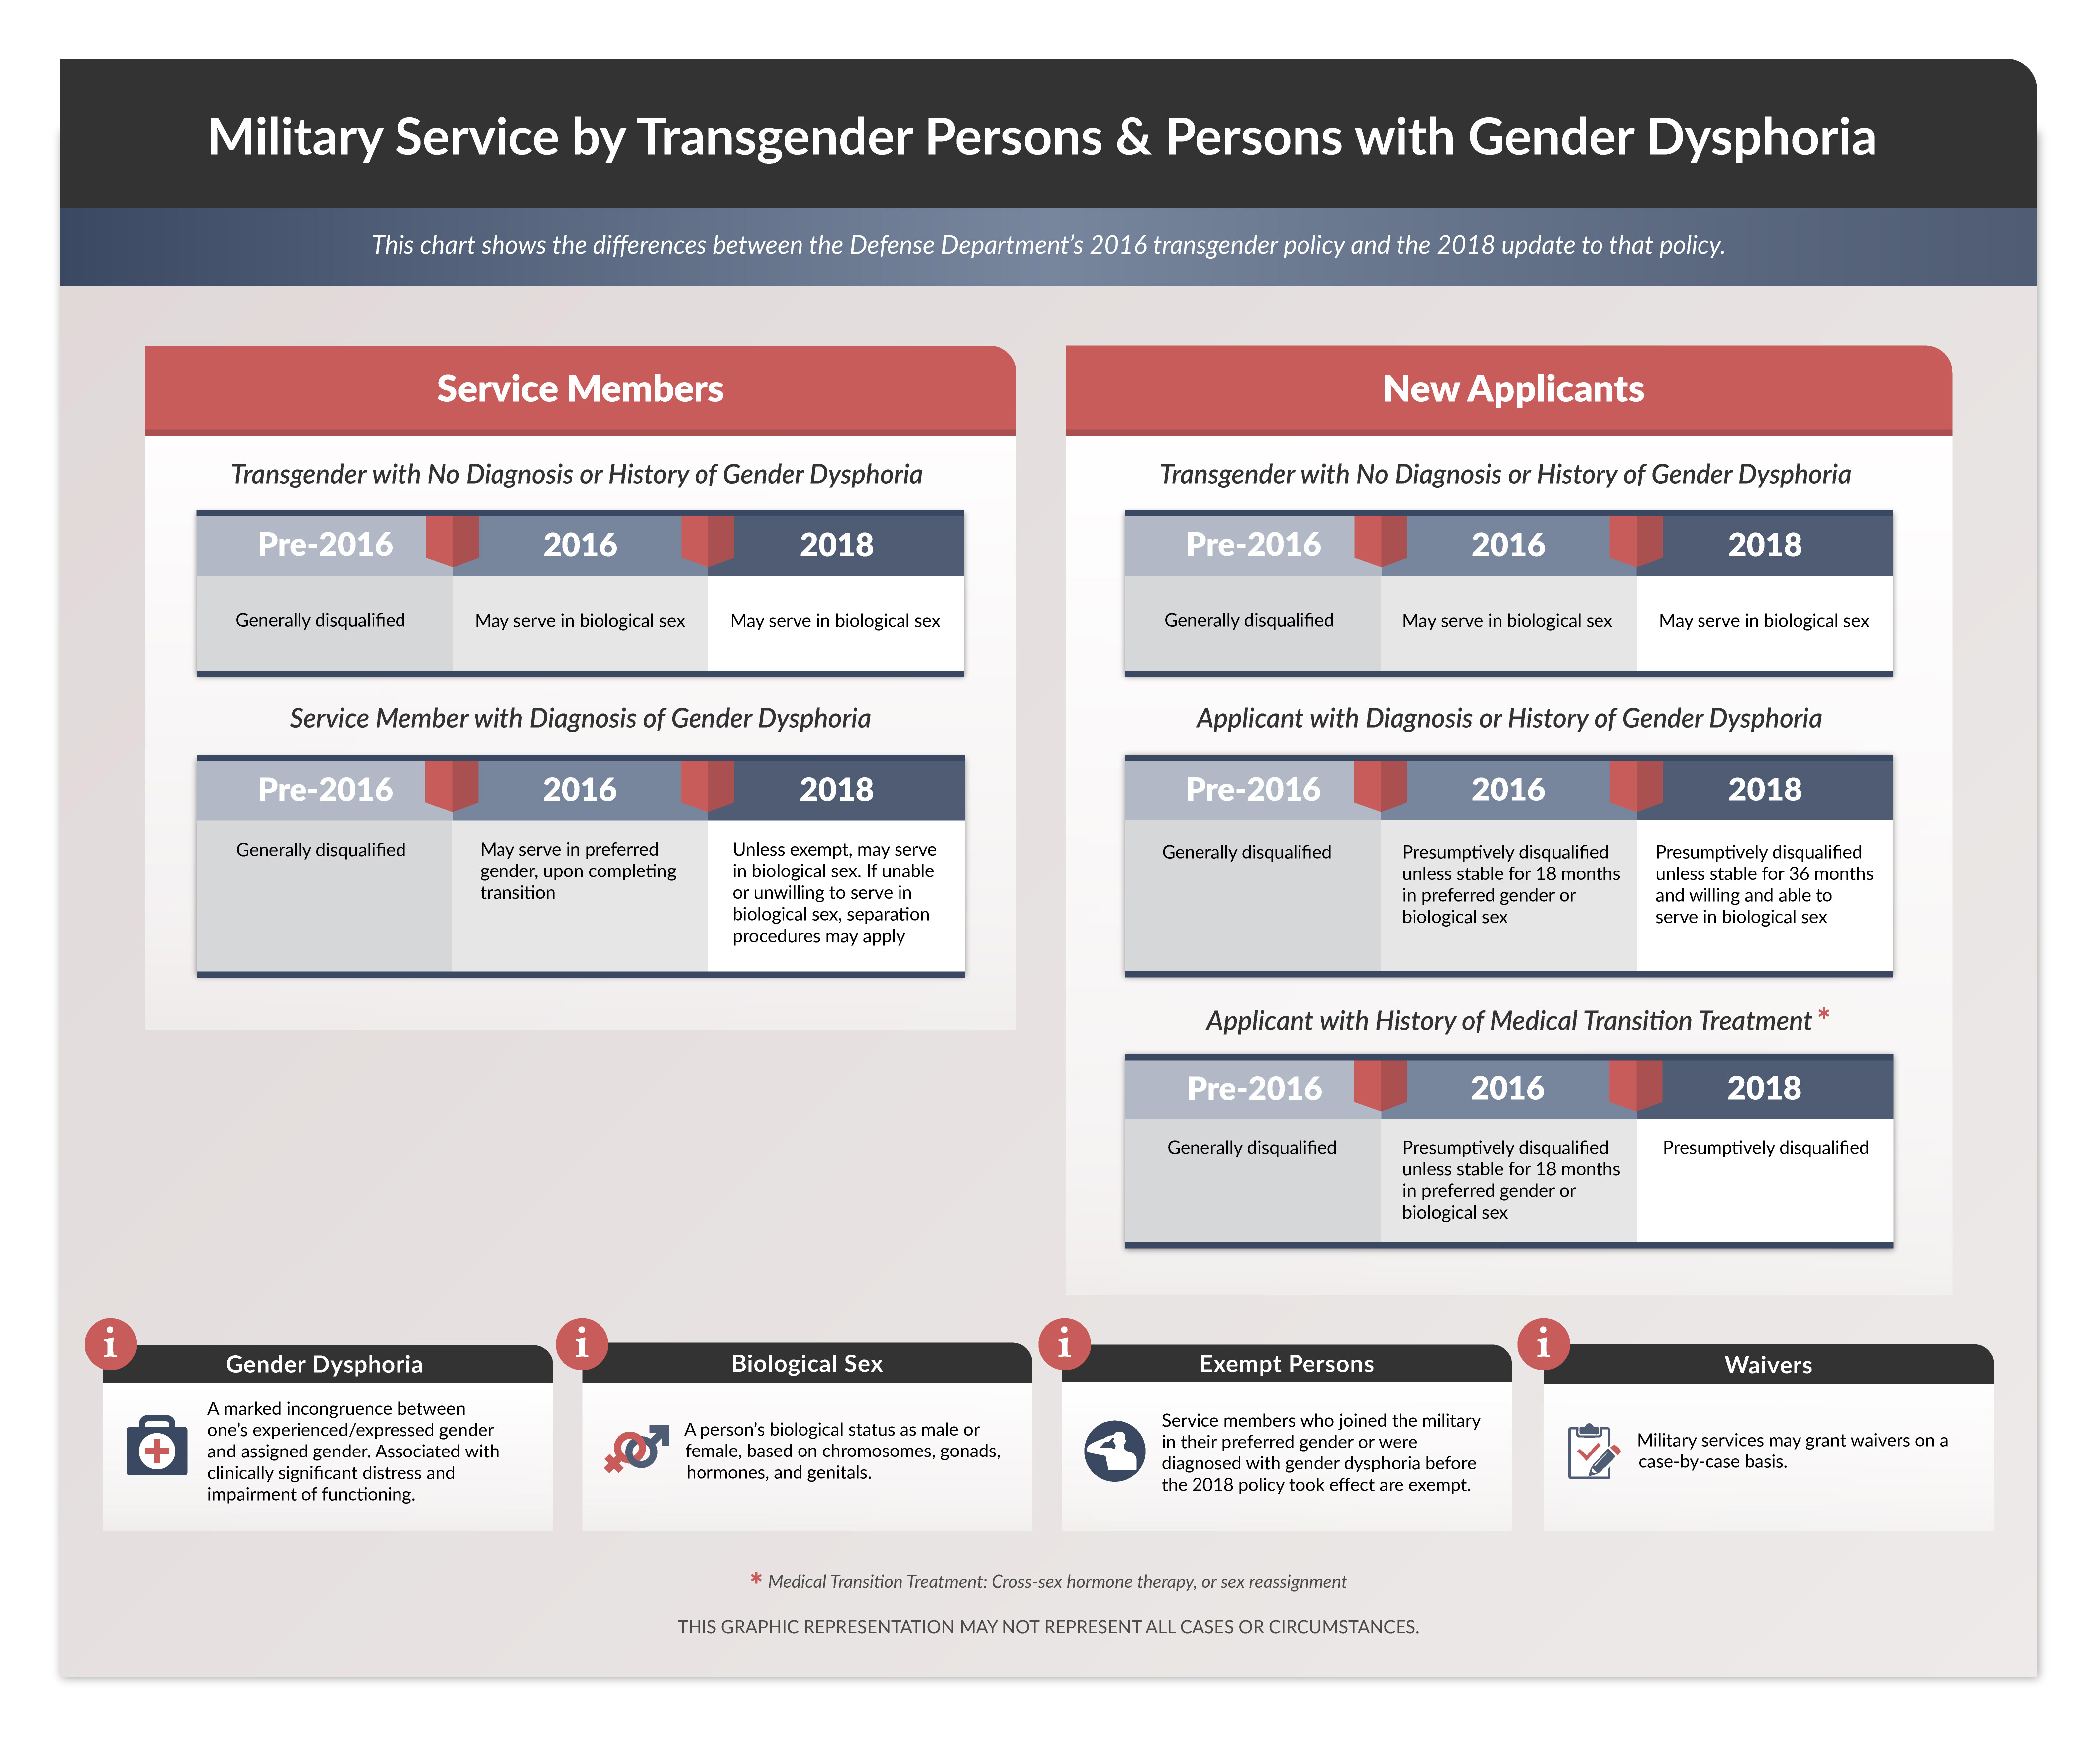 5 Things to Know About DODs New Policy on Military Service by Transgender Persons and Persons With Gender Dysphoriau003e image